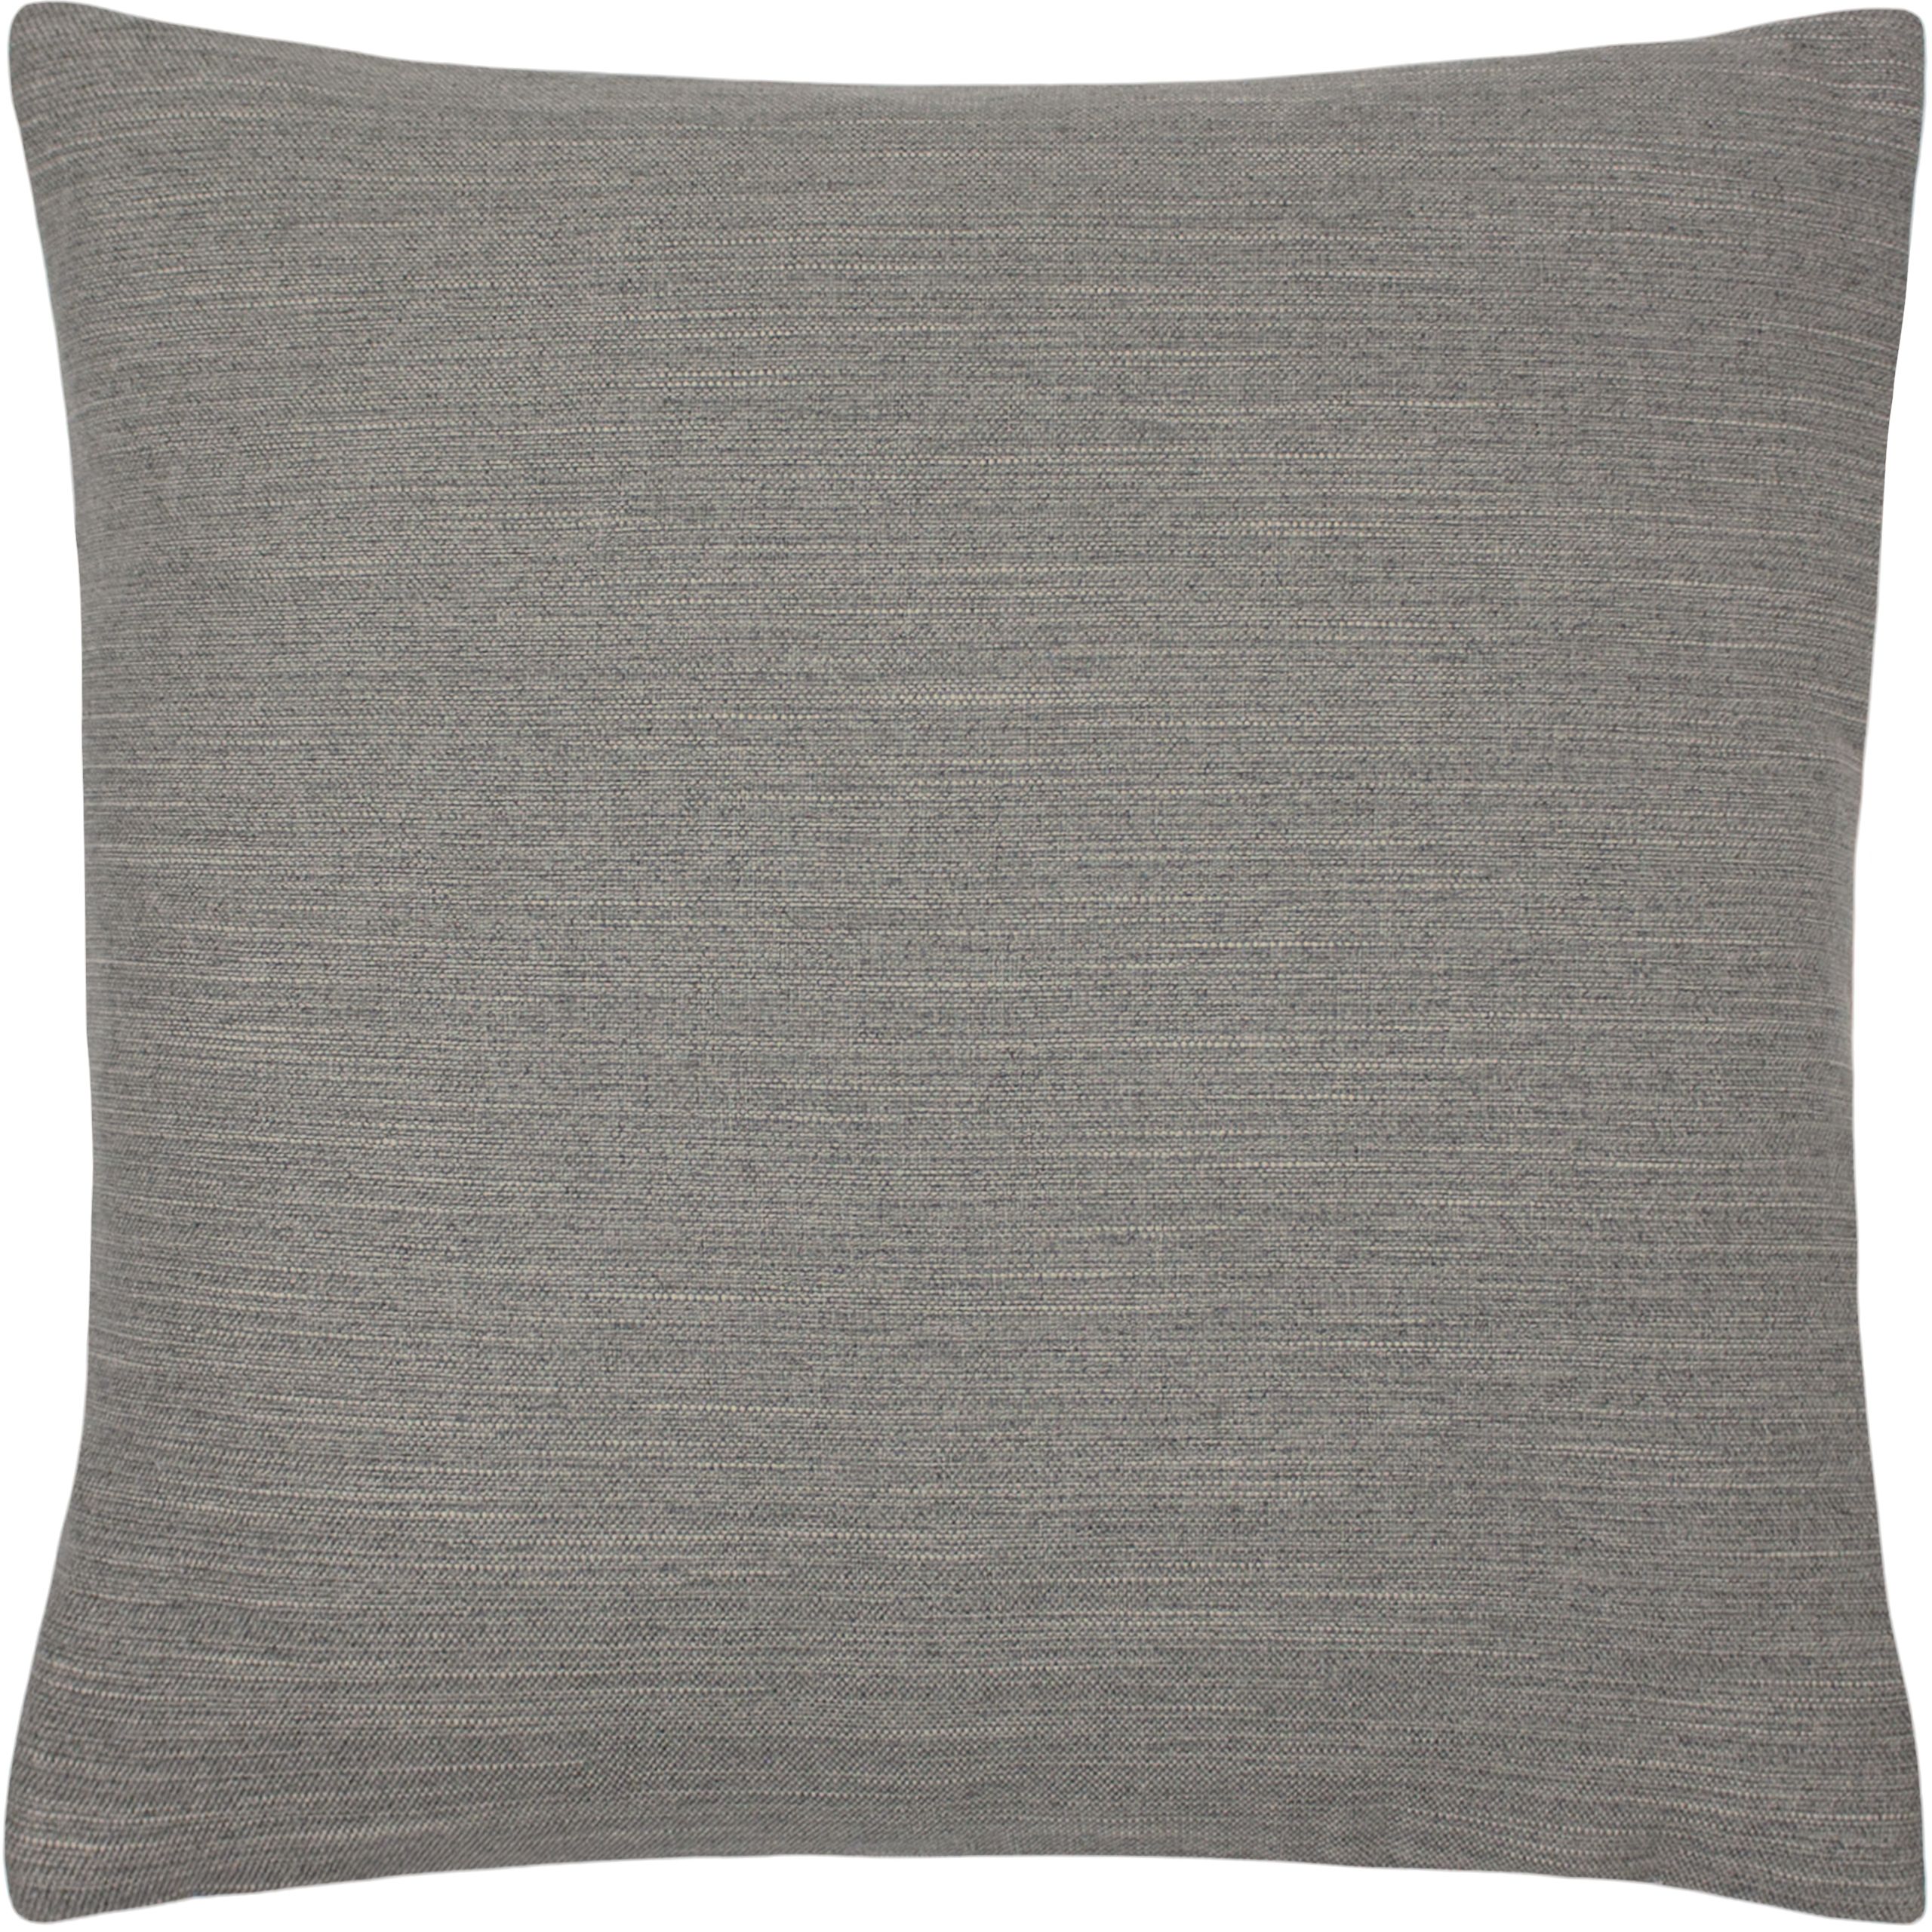 A simple yet sophisticated plain cushion that can add that finishing touch to any space. 